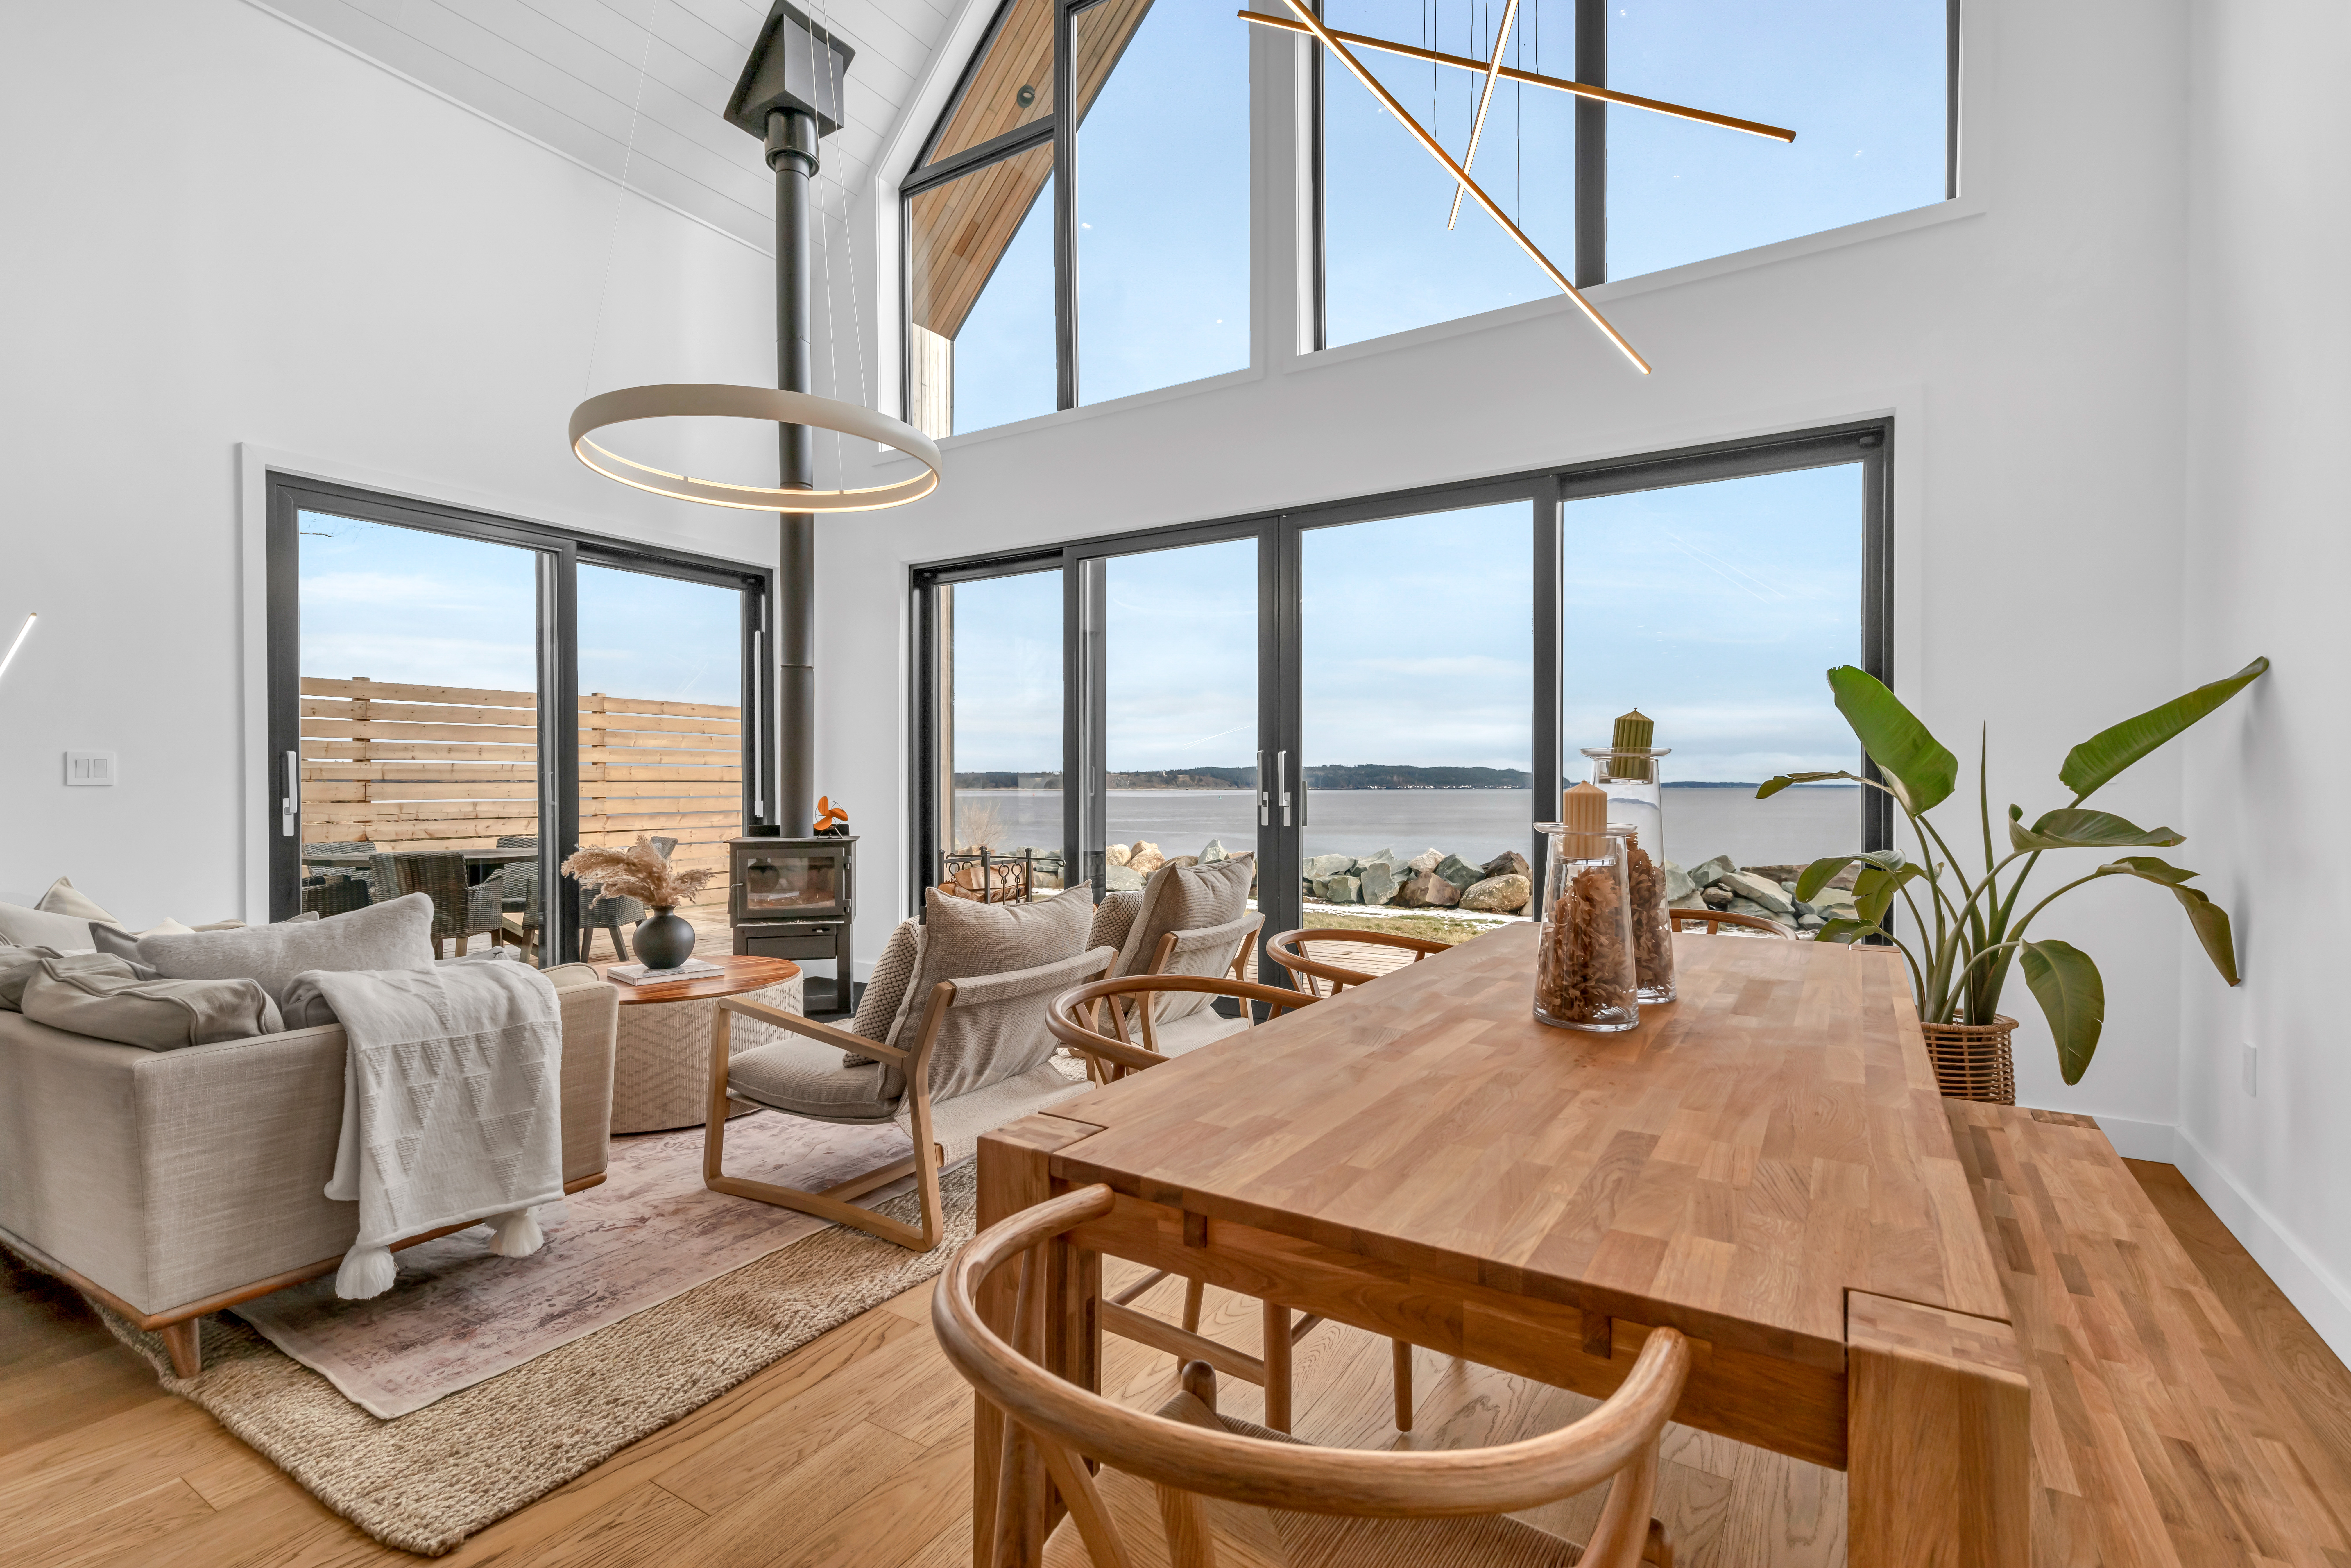 A big open-concept living and dining area. Floor-to-ceiling windows look out to the ocean and let in lots of natural light.